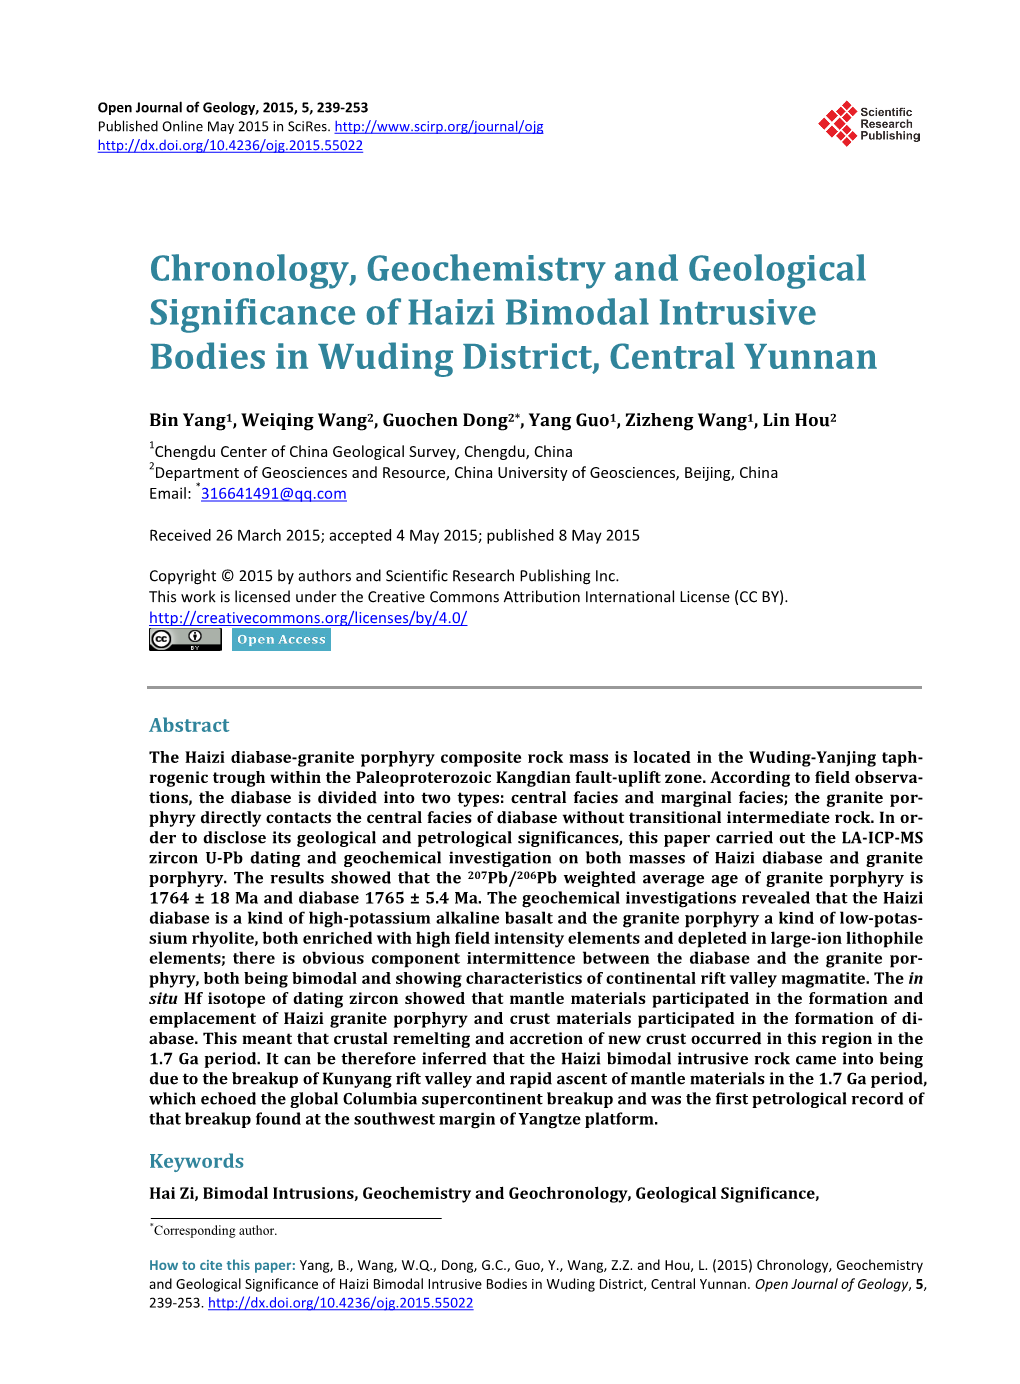 Chronology, Geochemistry and Geological Significance of Haizi Bimodal Intrusive Bodies in Wuding District, Central Yunnan